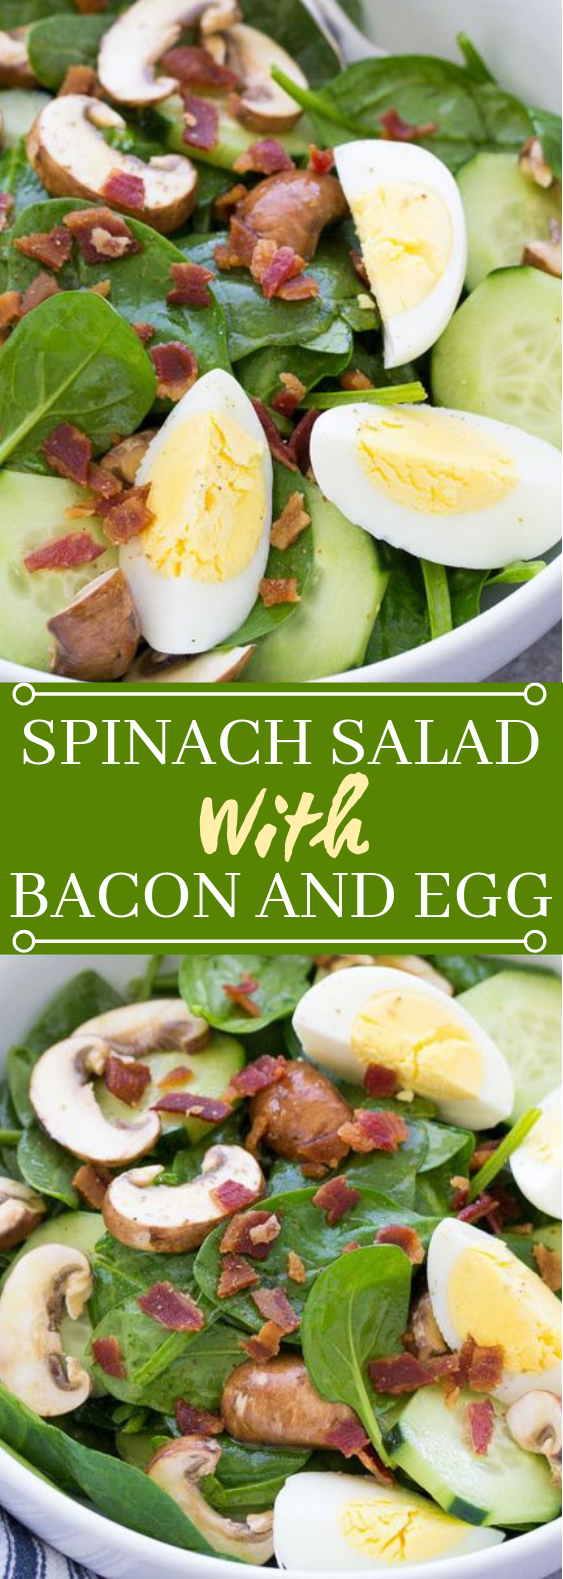 Spinach Salad with Bacon and Eggs #healthy #lunch